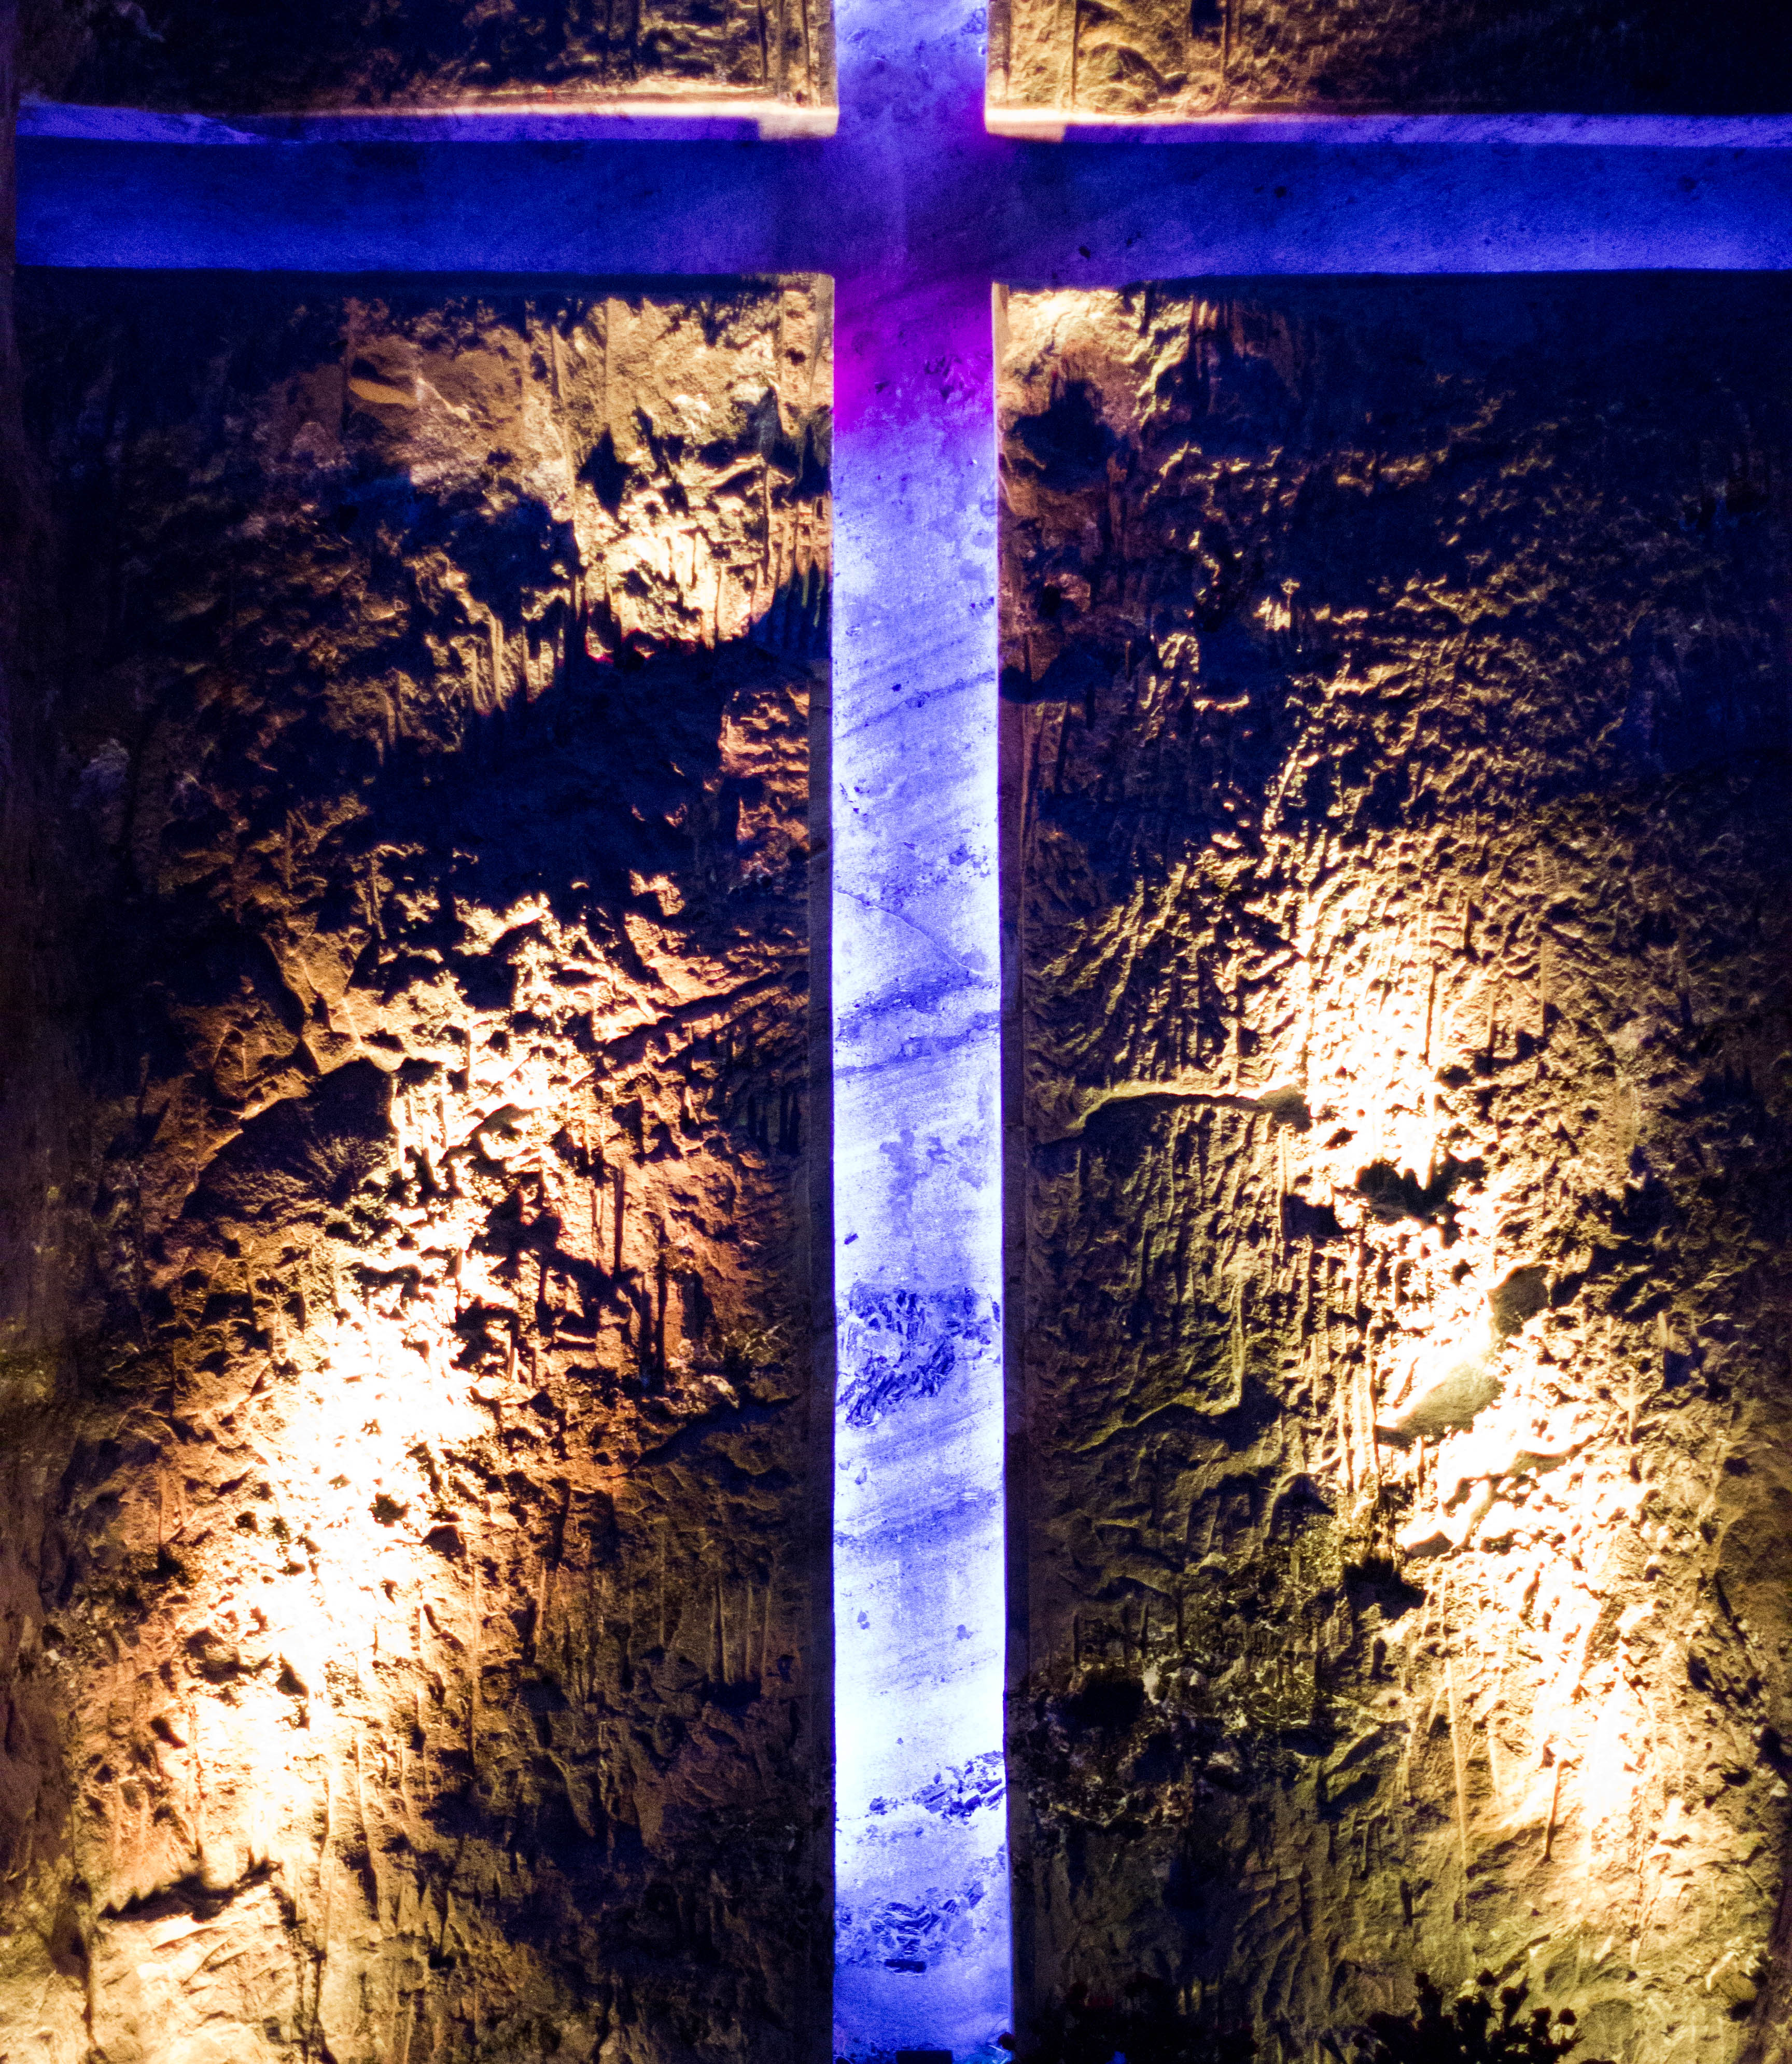 Salt cathedral in zipaquira photo